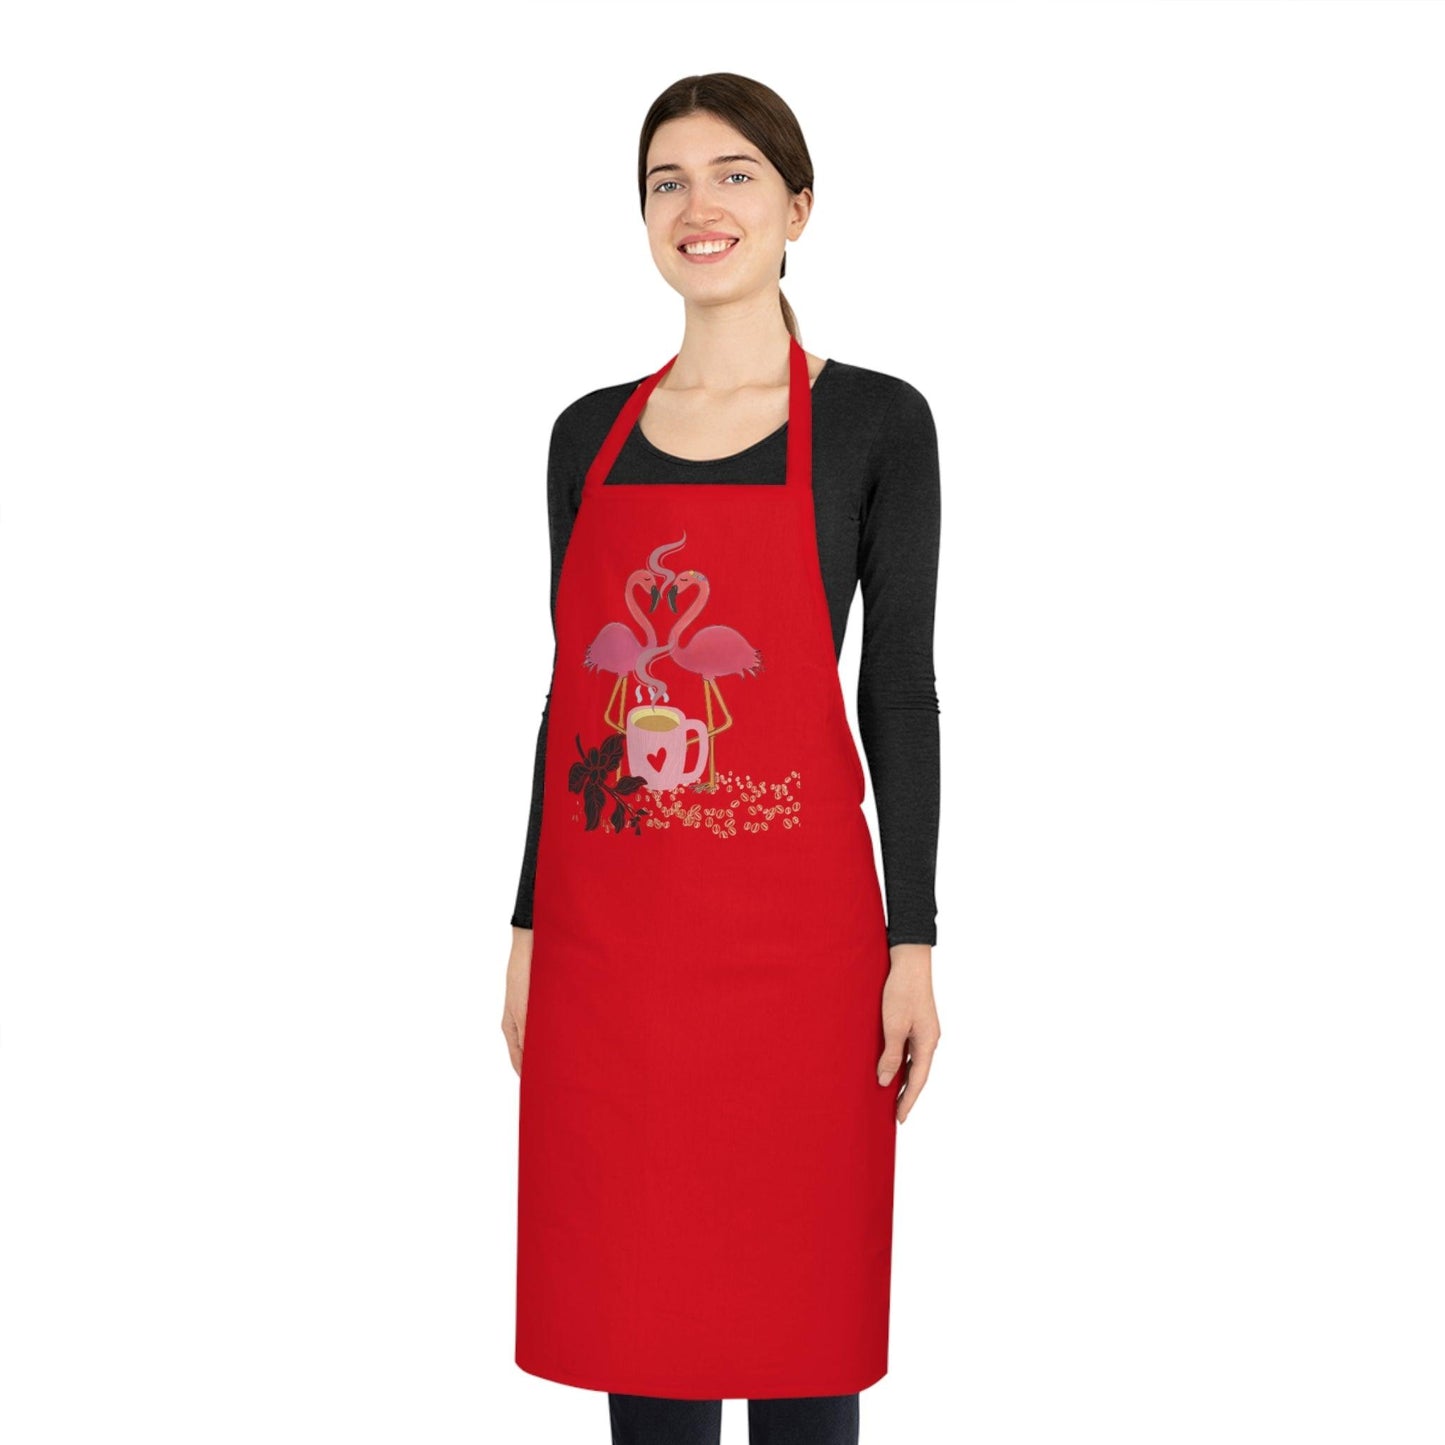 Cute Adult Cafe Cooking Apron - COFFEEBRE